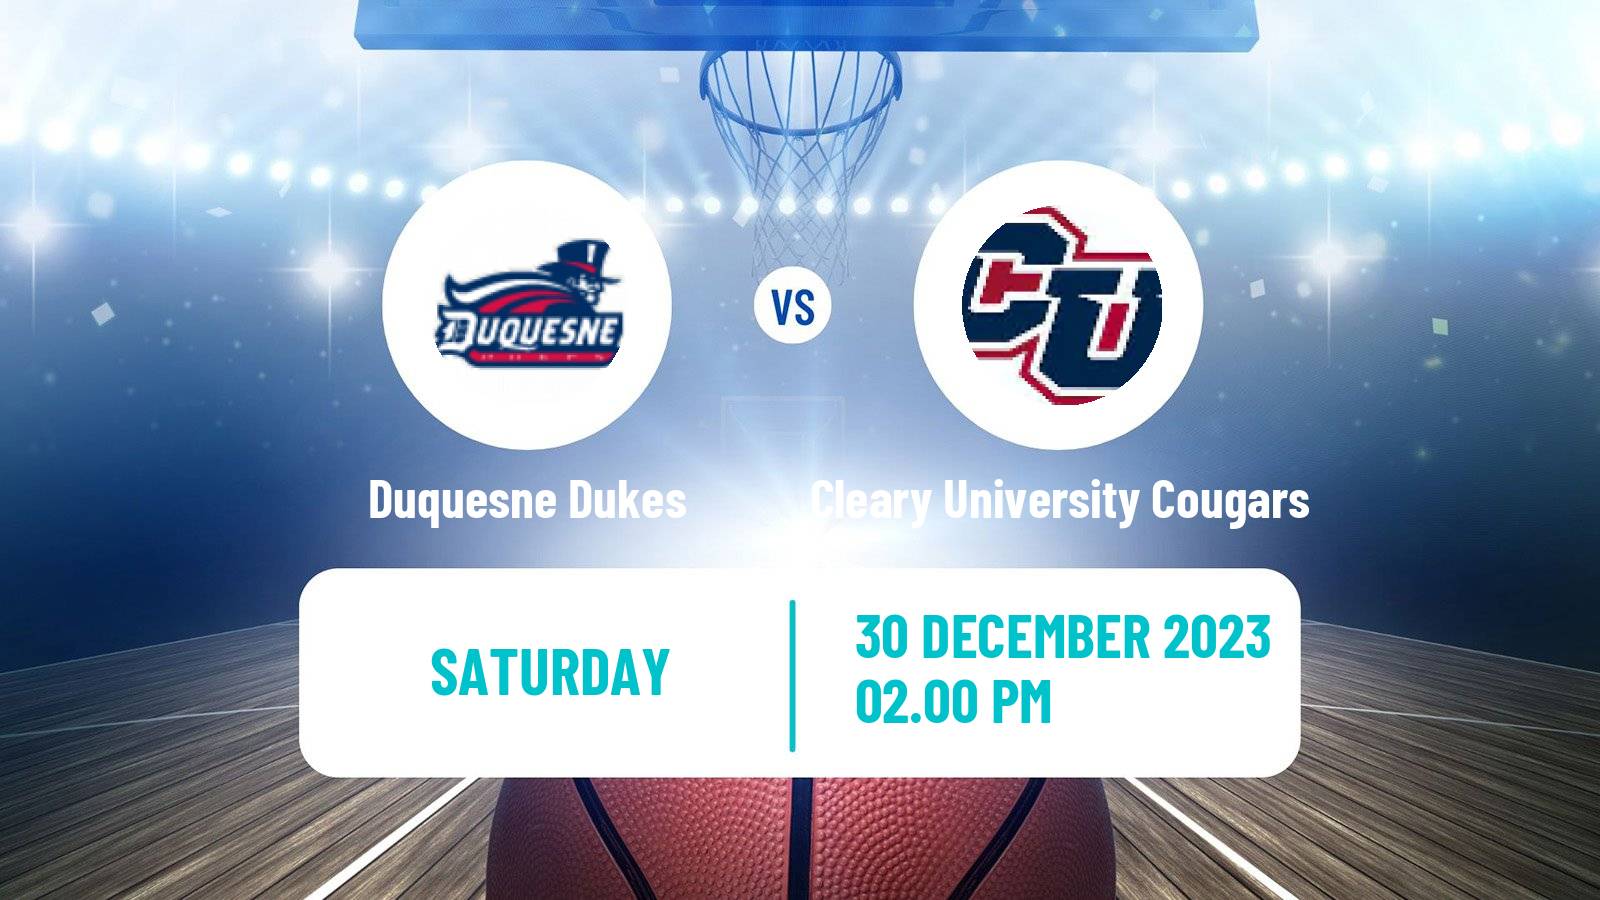 Basketball NCAA College Basketball Duquesne Dukes - Cleary University Cougars